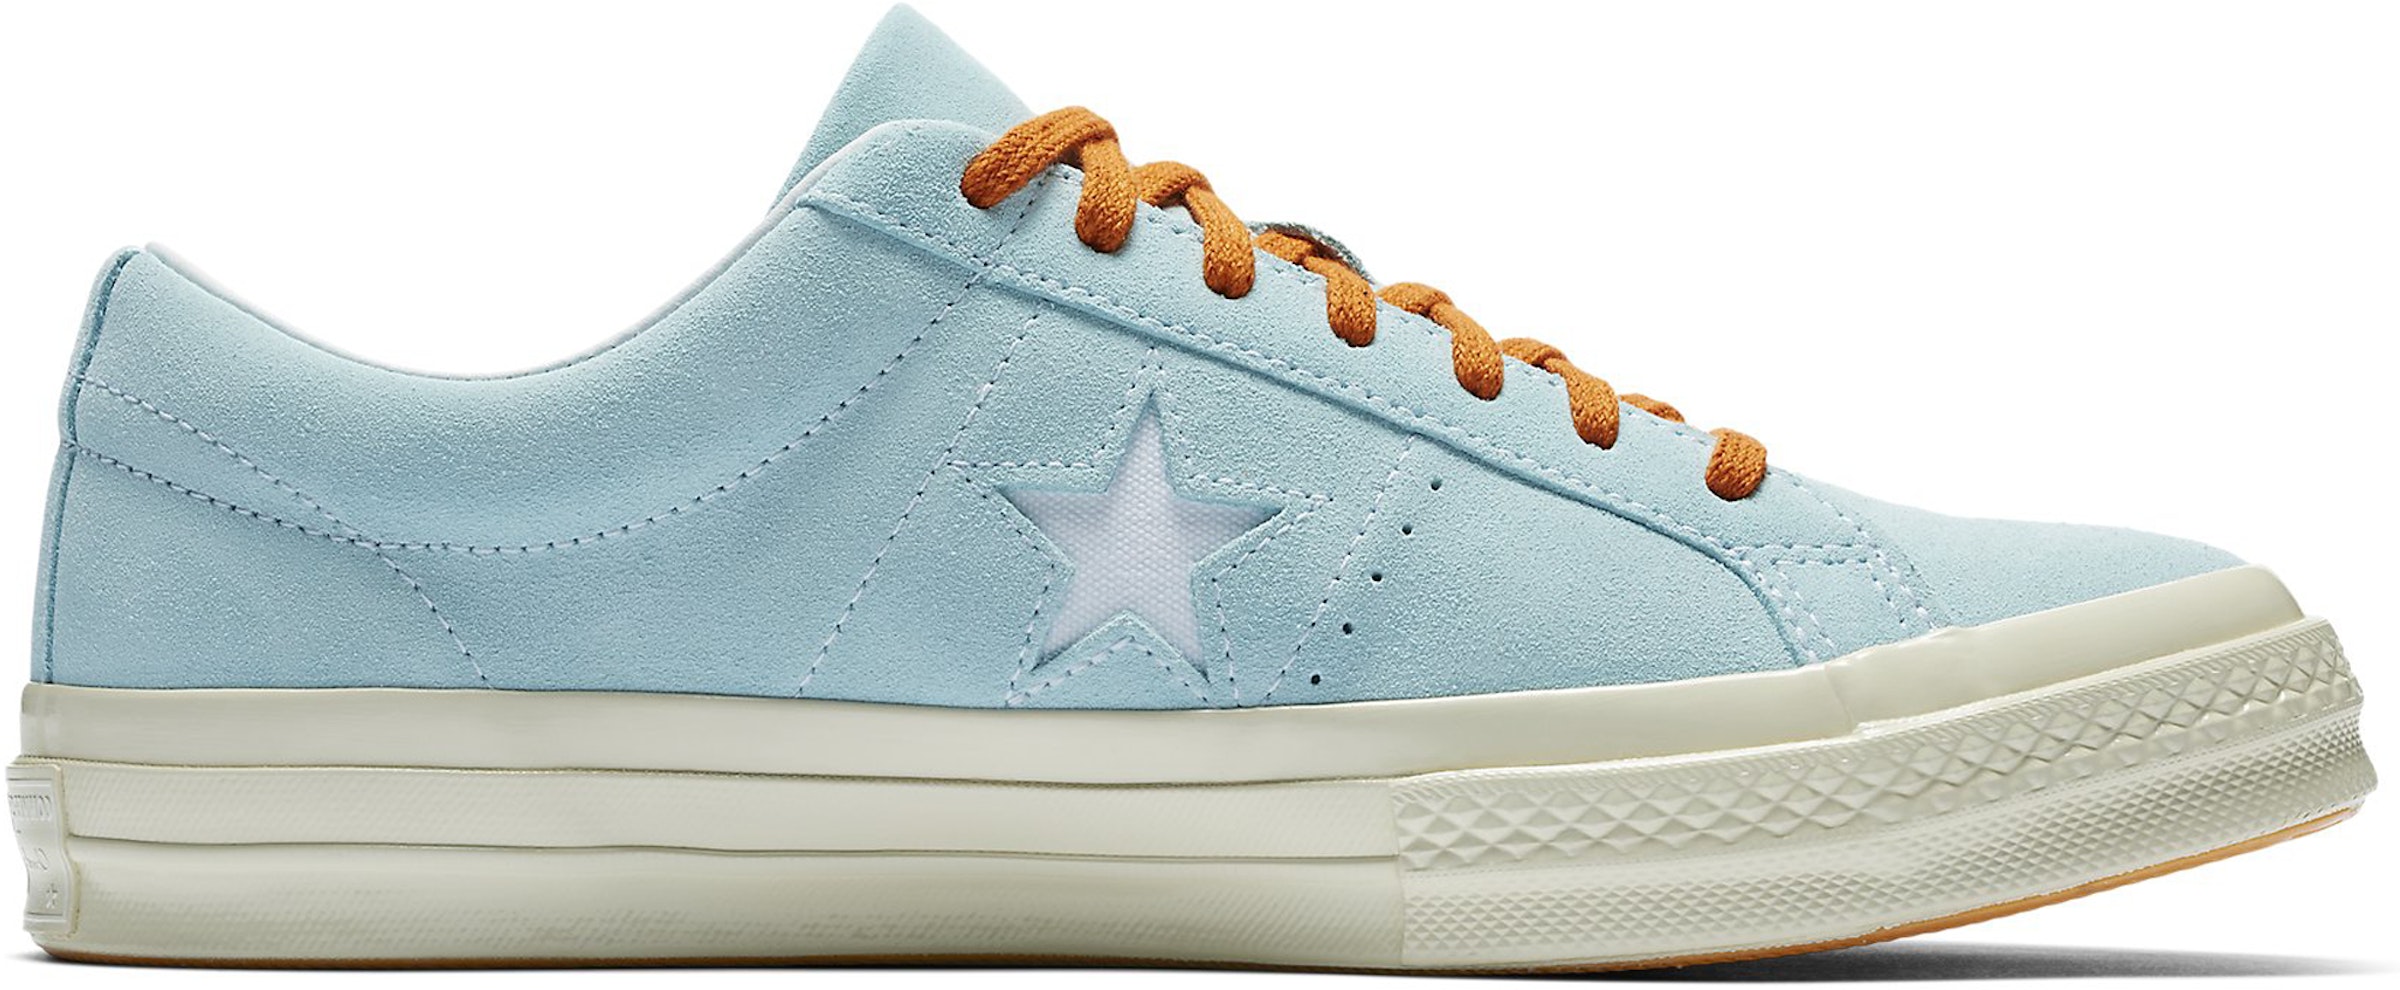 Converse One Star Ox the Creator Golf Wang Clearwater Men's 160111C - US